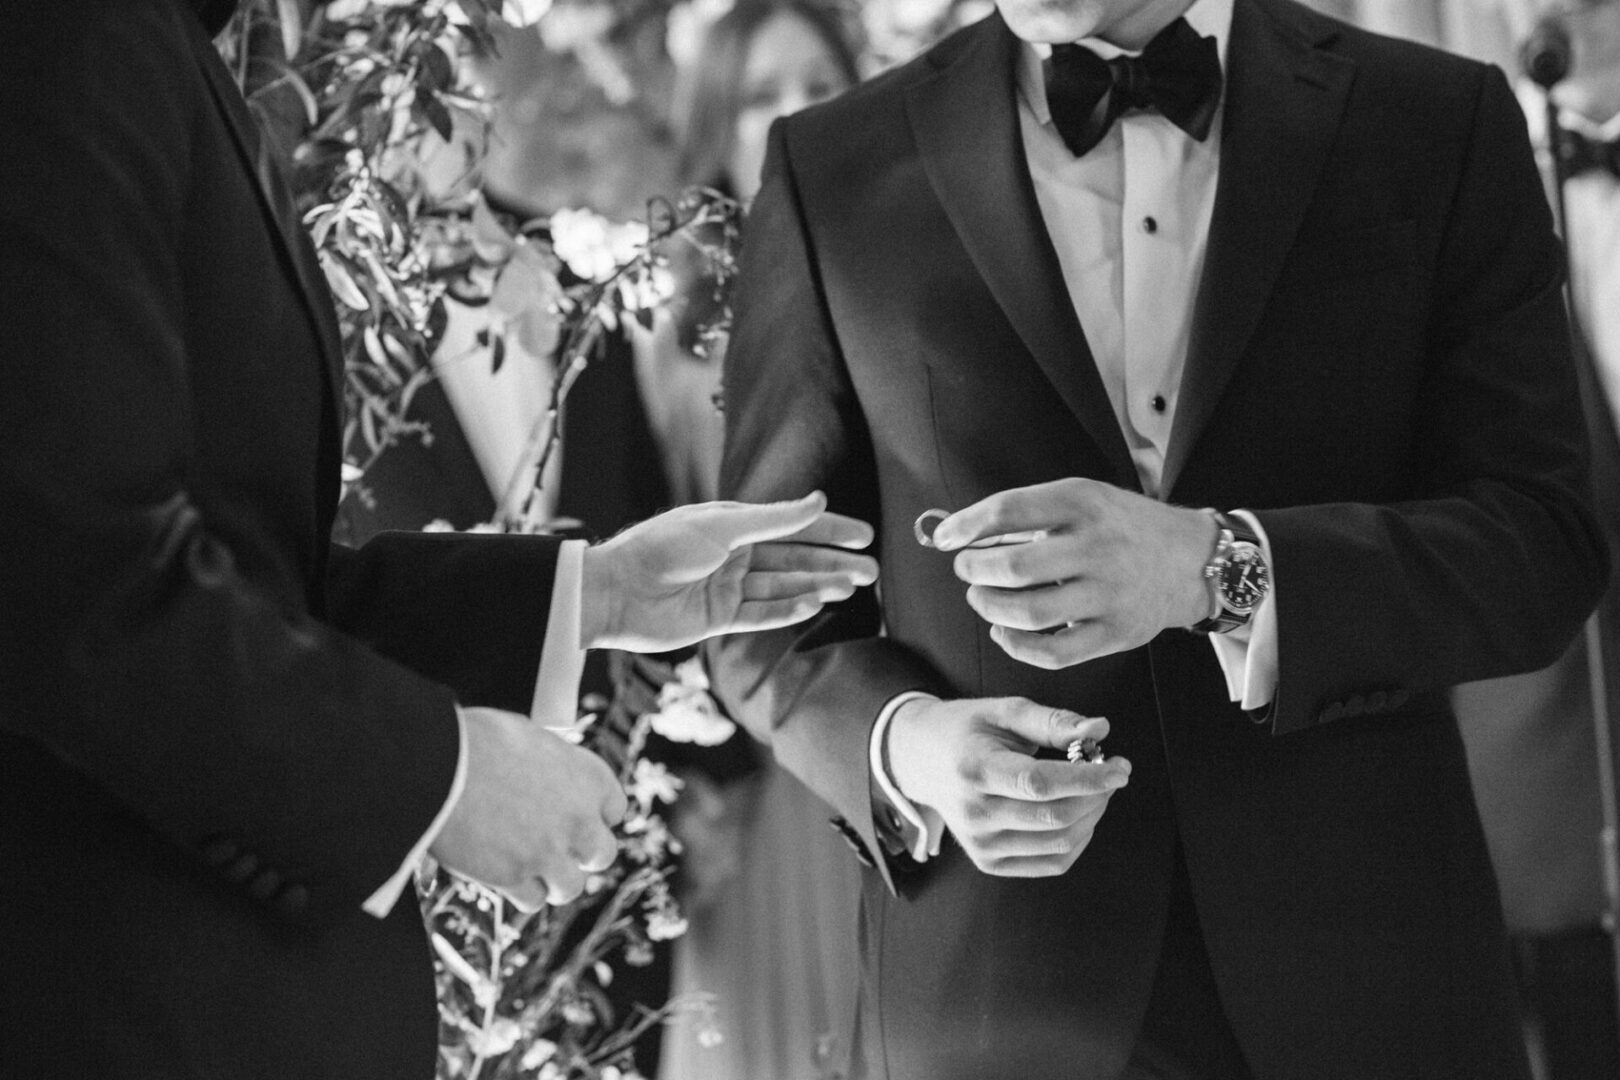 The groom receives the wedding ring from the best man